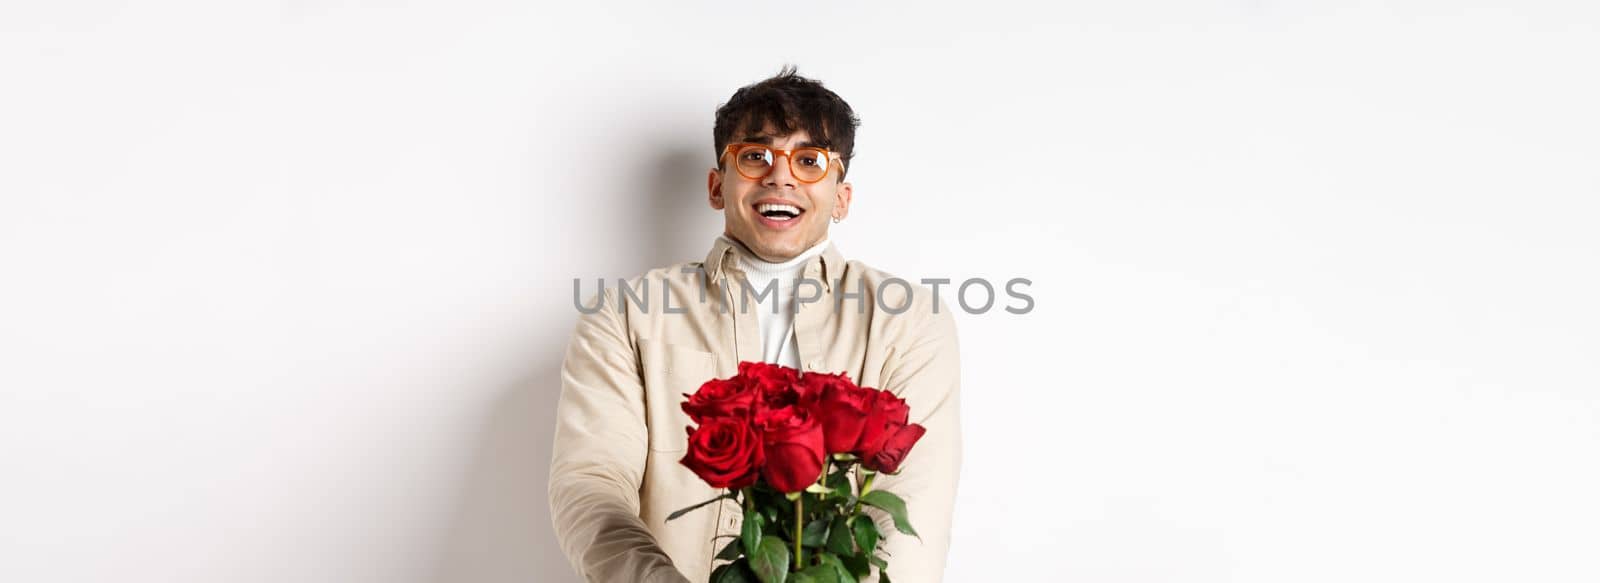 Man in love holding red roses and looking tenderly at camera, staring at lover with happy face, celebrating Valentines day with girlfriend, standing over white background.